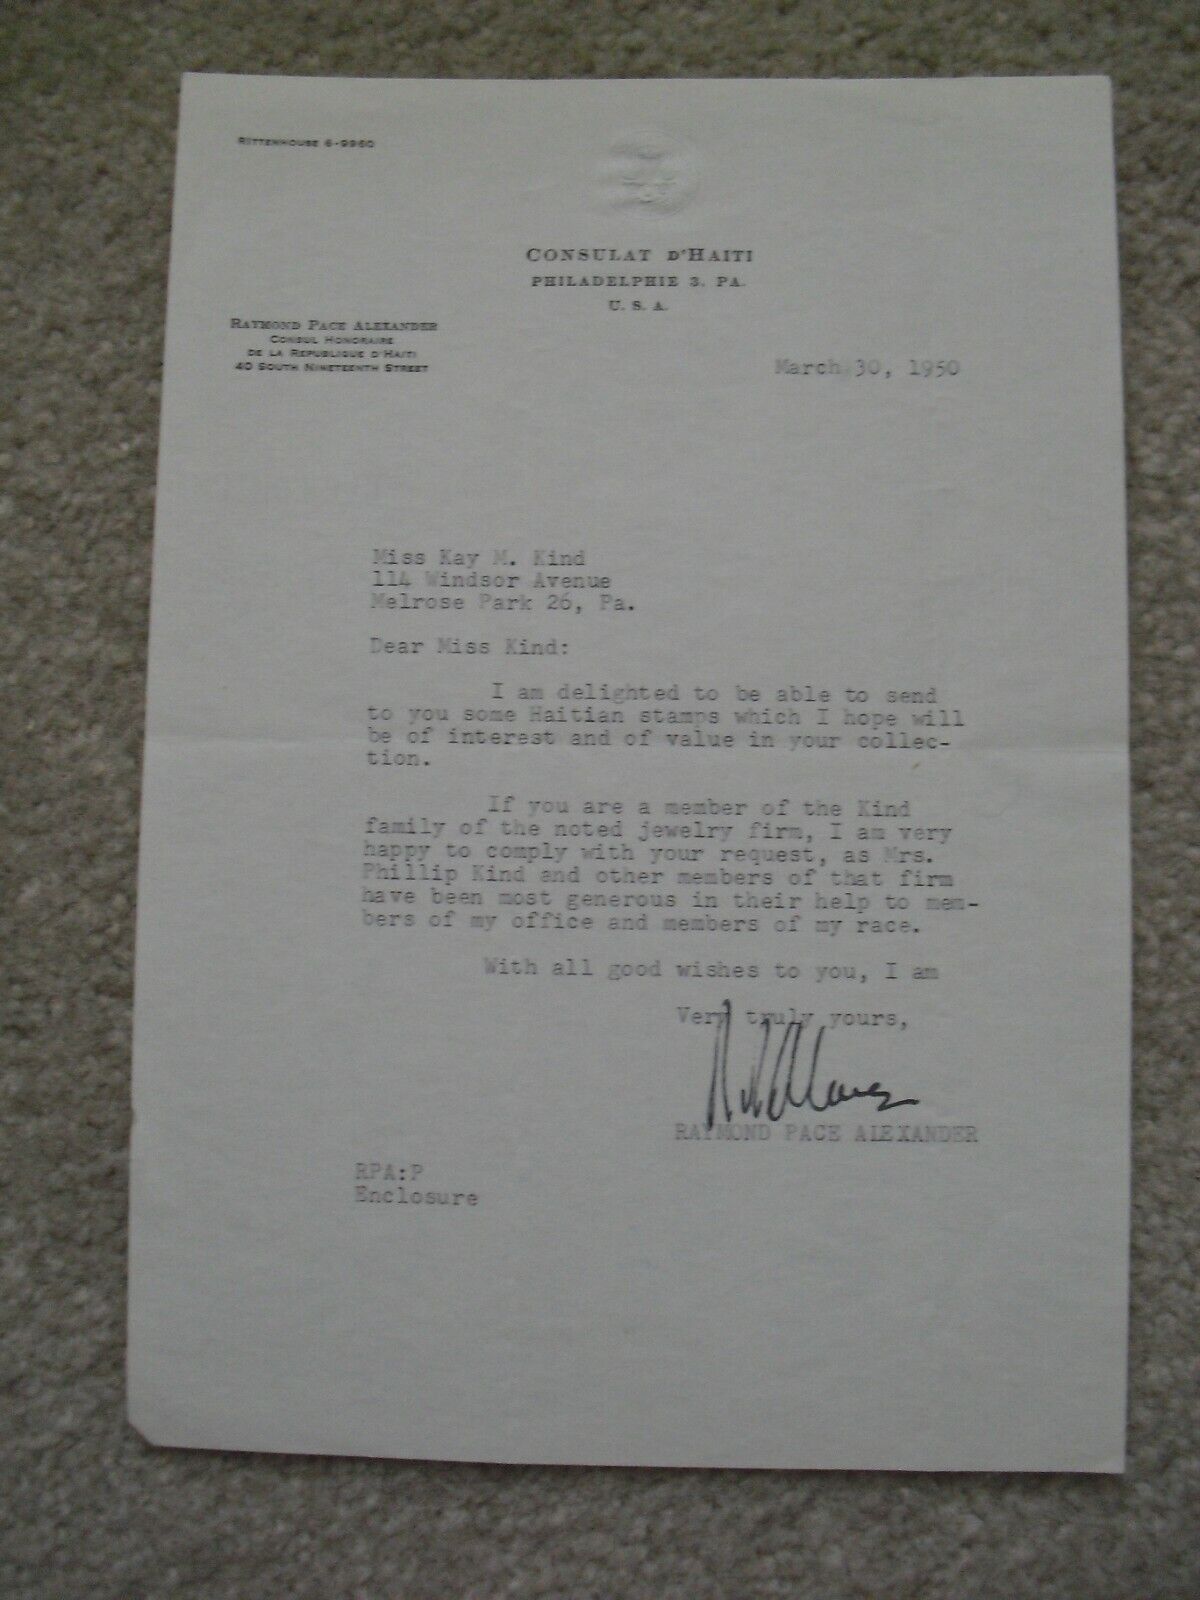 RARE Original 1950 Judge Raymond Alexander Signed Letter Early Civil Rights